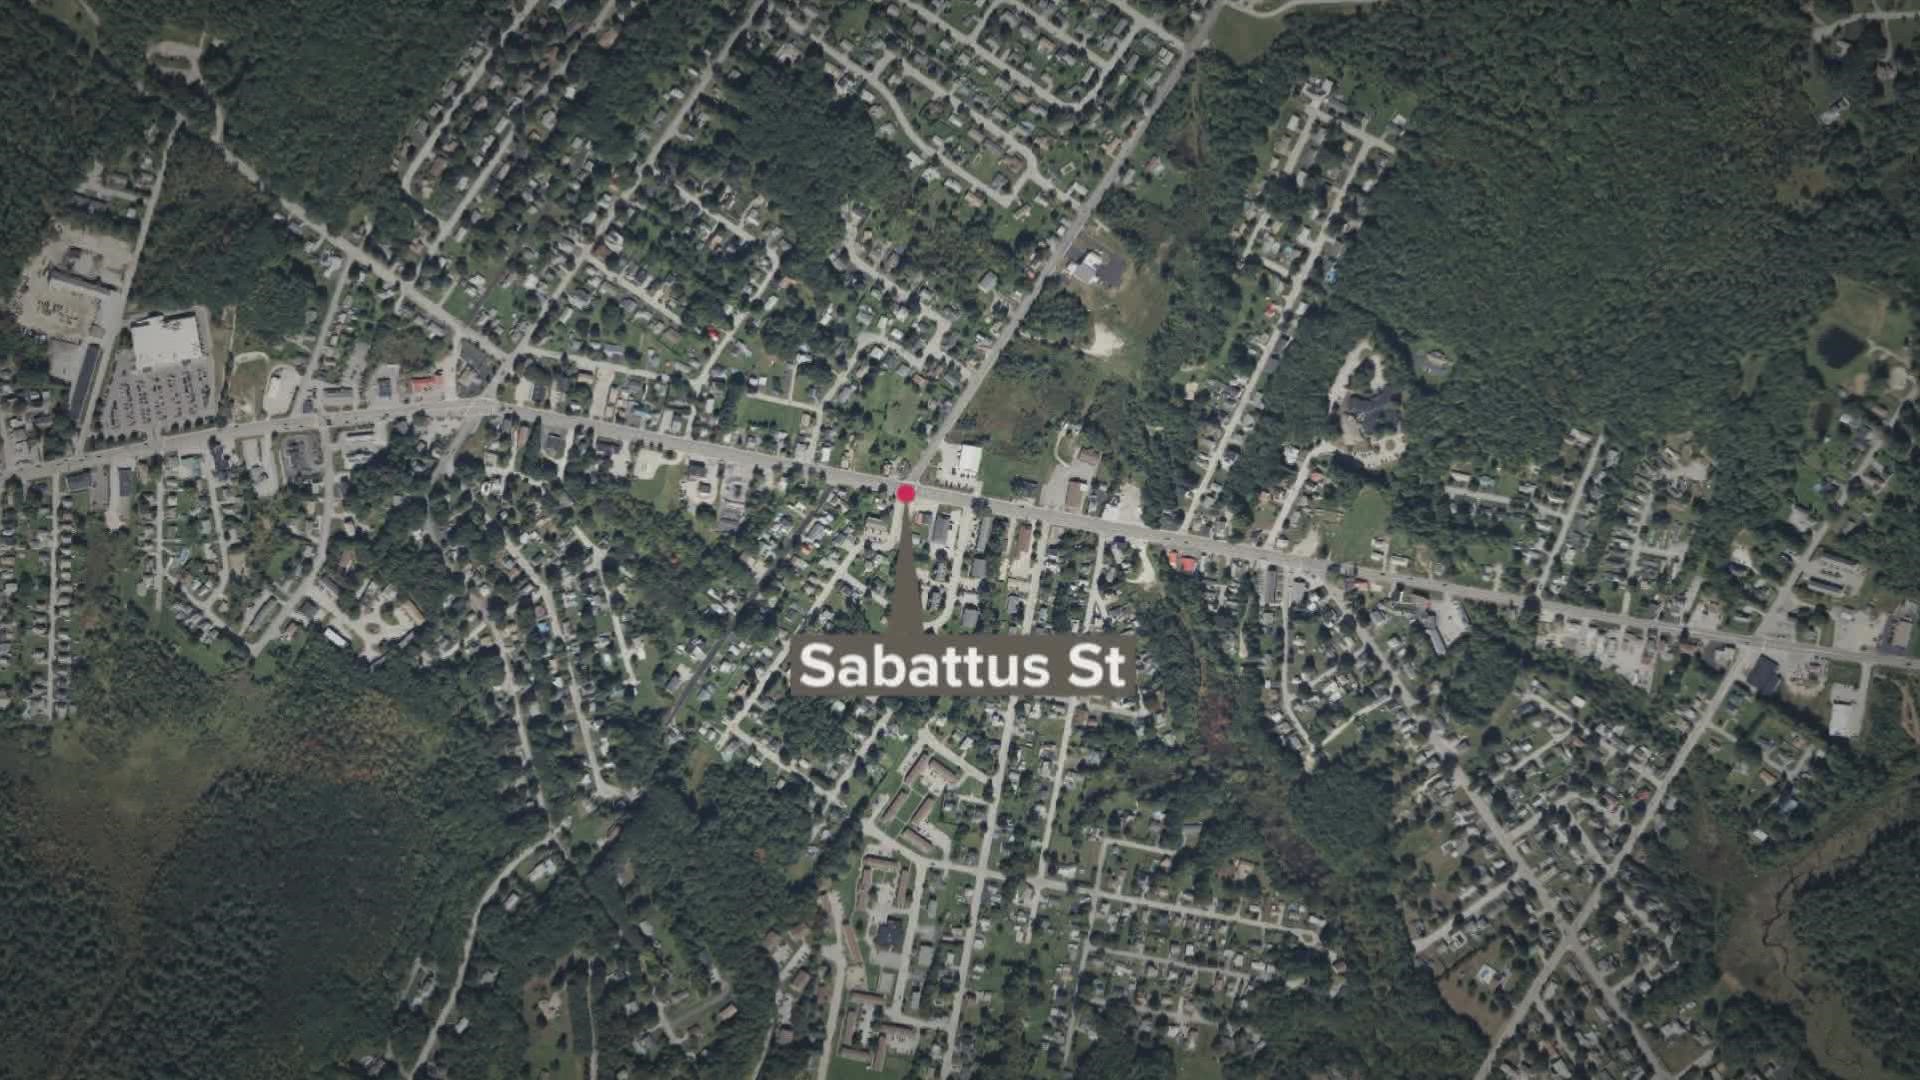 The 49-year-old was walking in the area of Sabattus and College streets when he was hit by a truck.